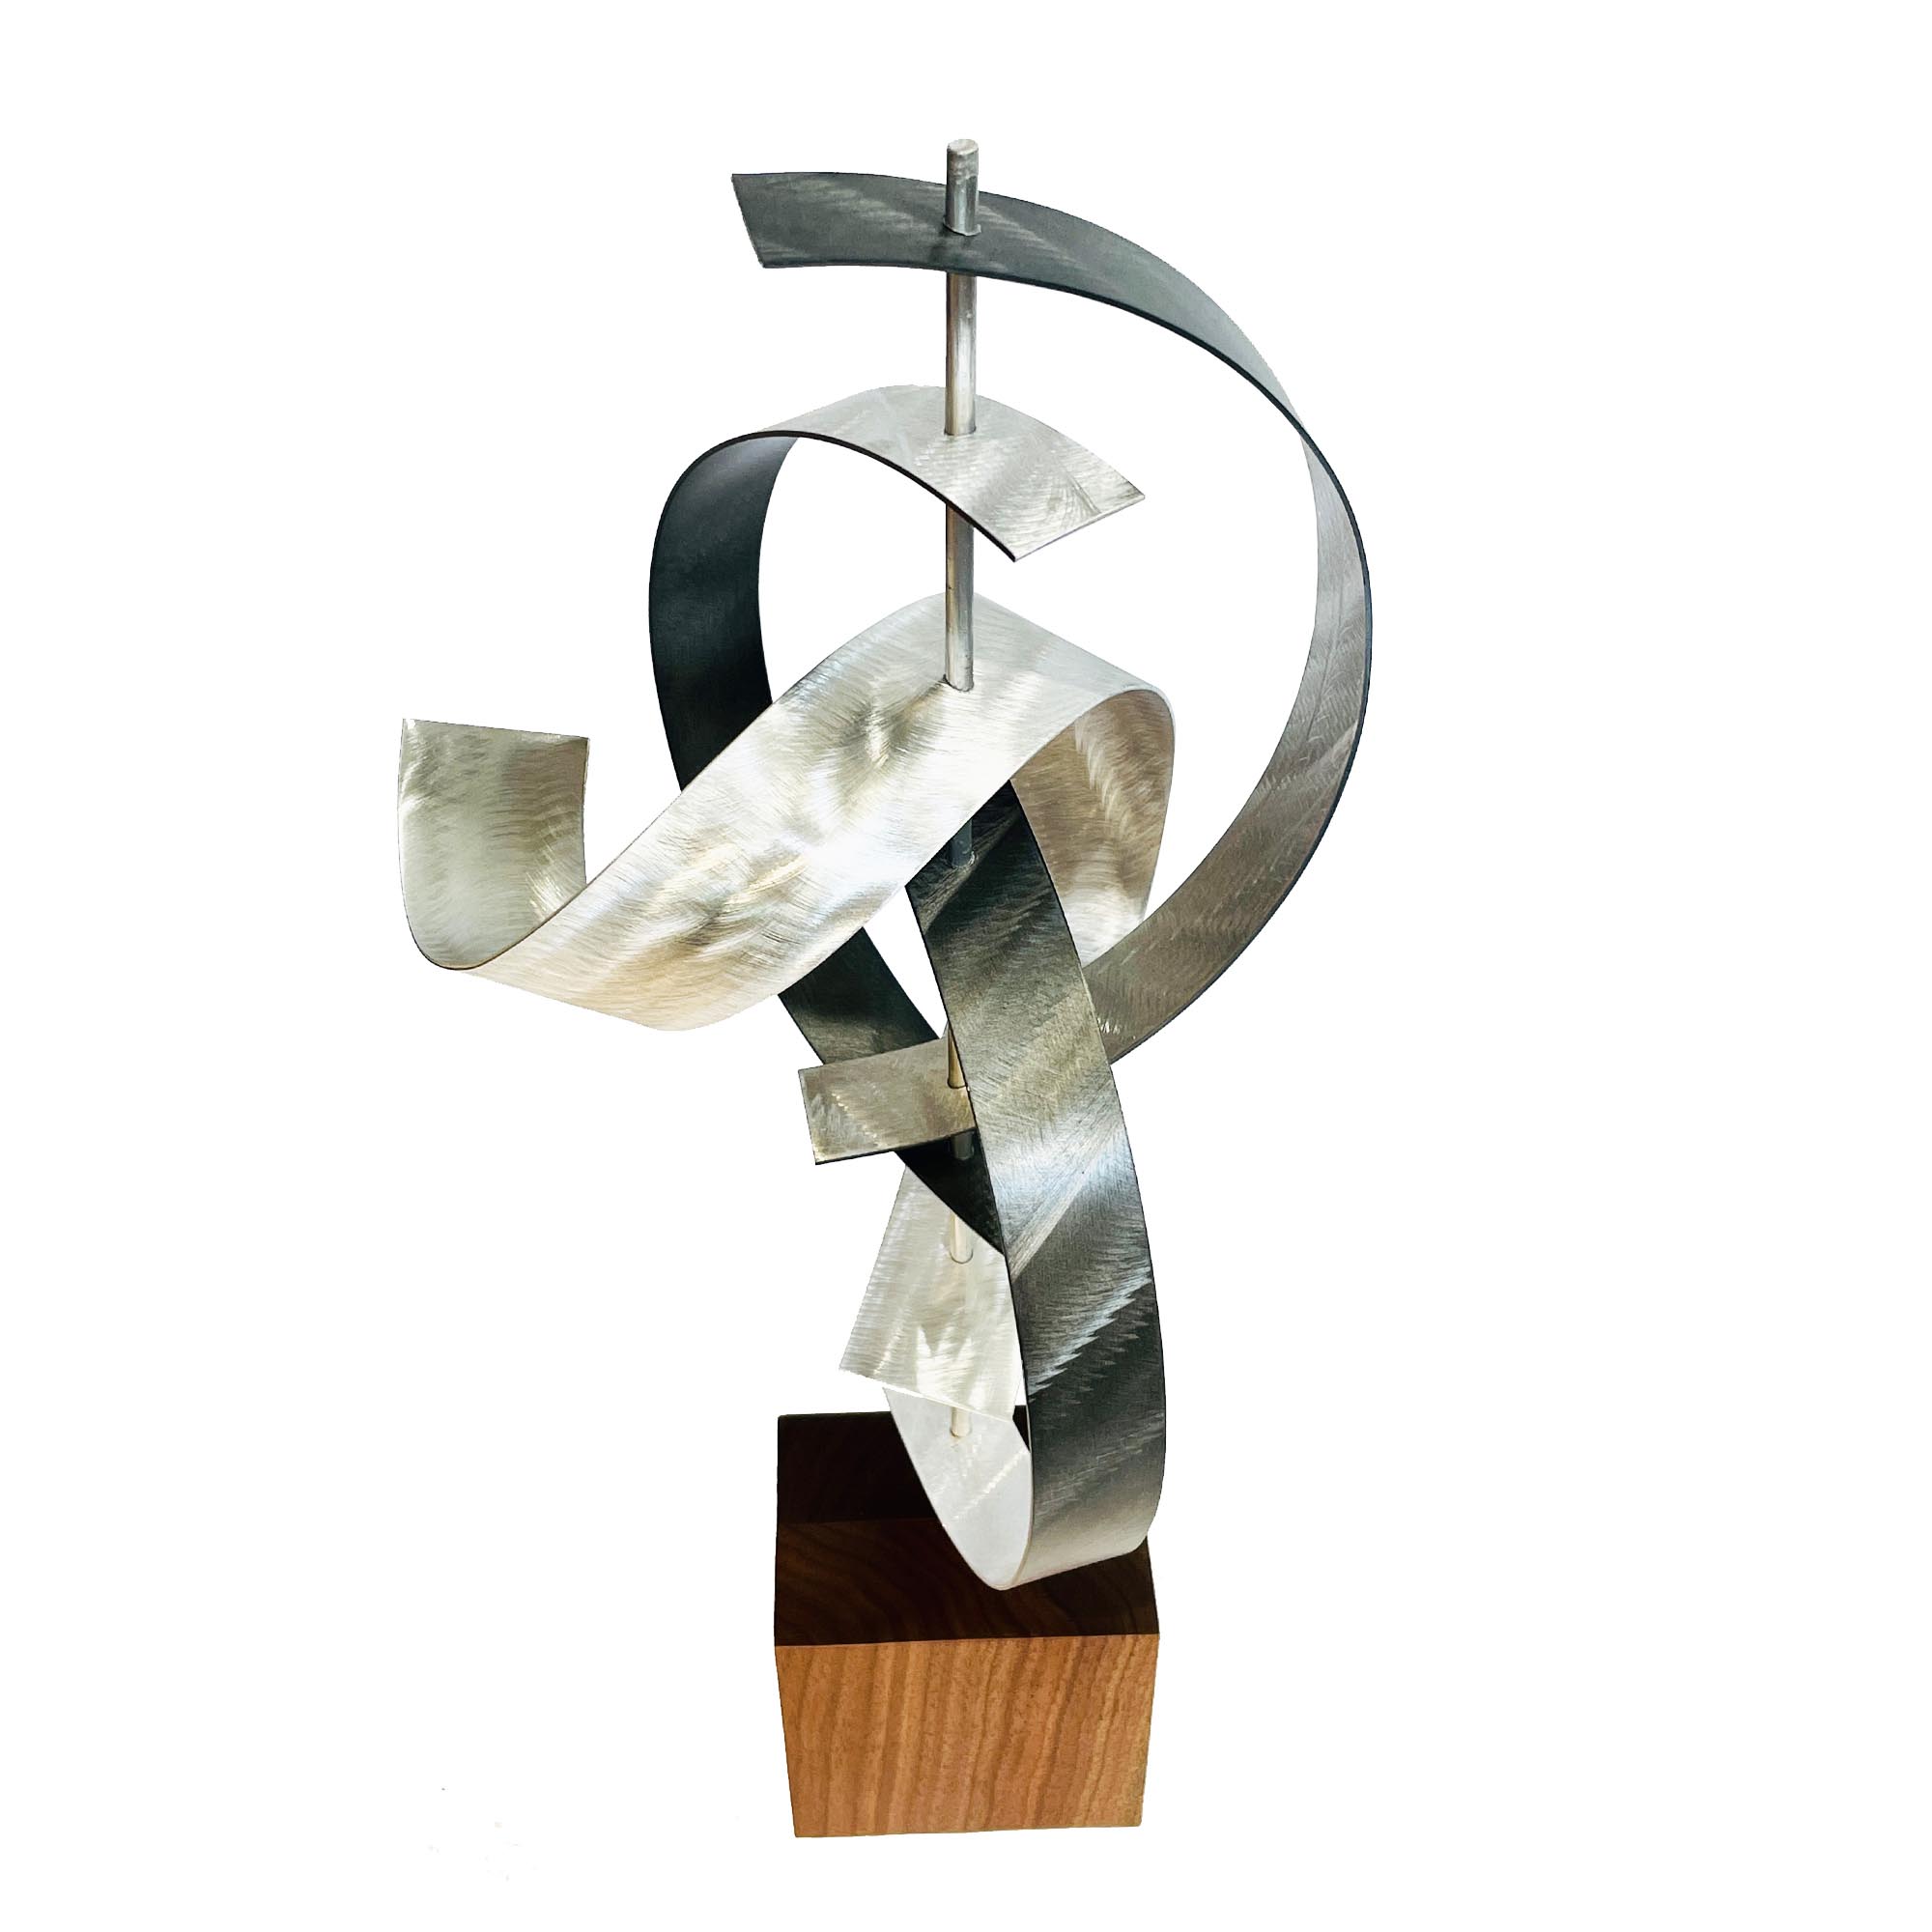 Wind v2 Walnut by Jackson Wright - Abstract Metal Sculpture, Kinetic Sculpture - Image 3